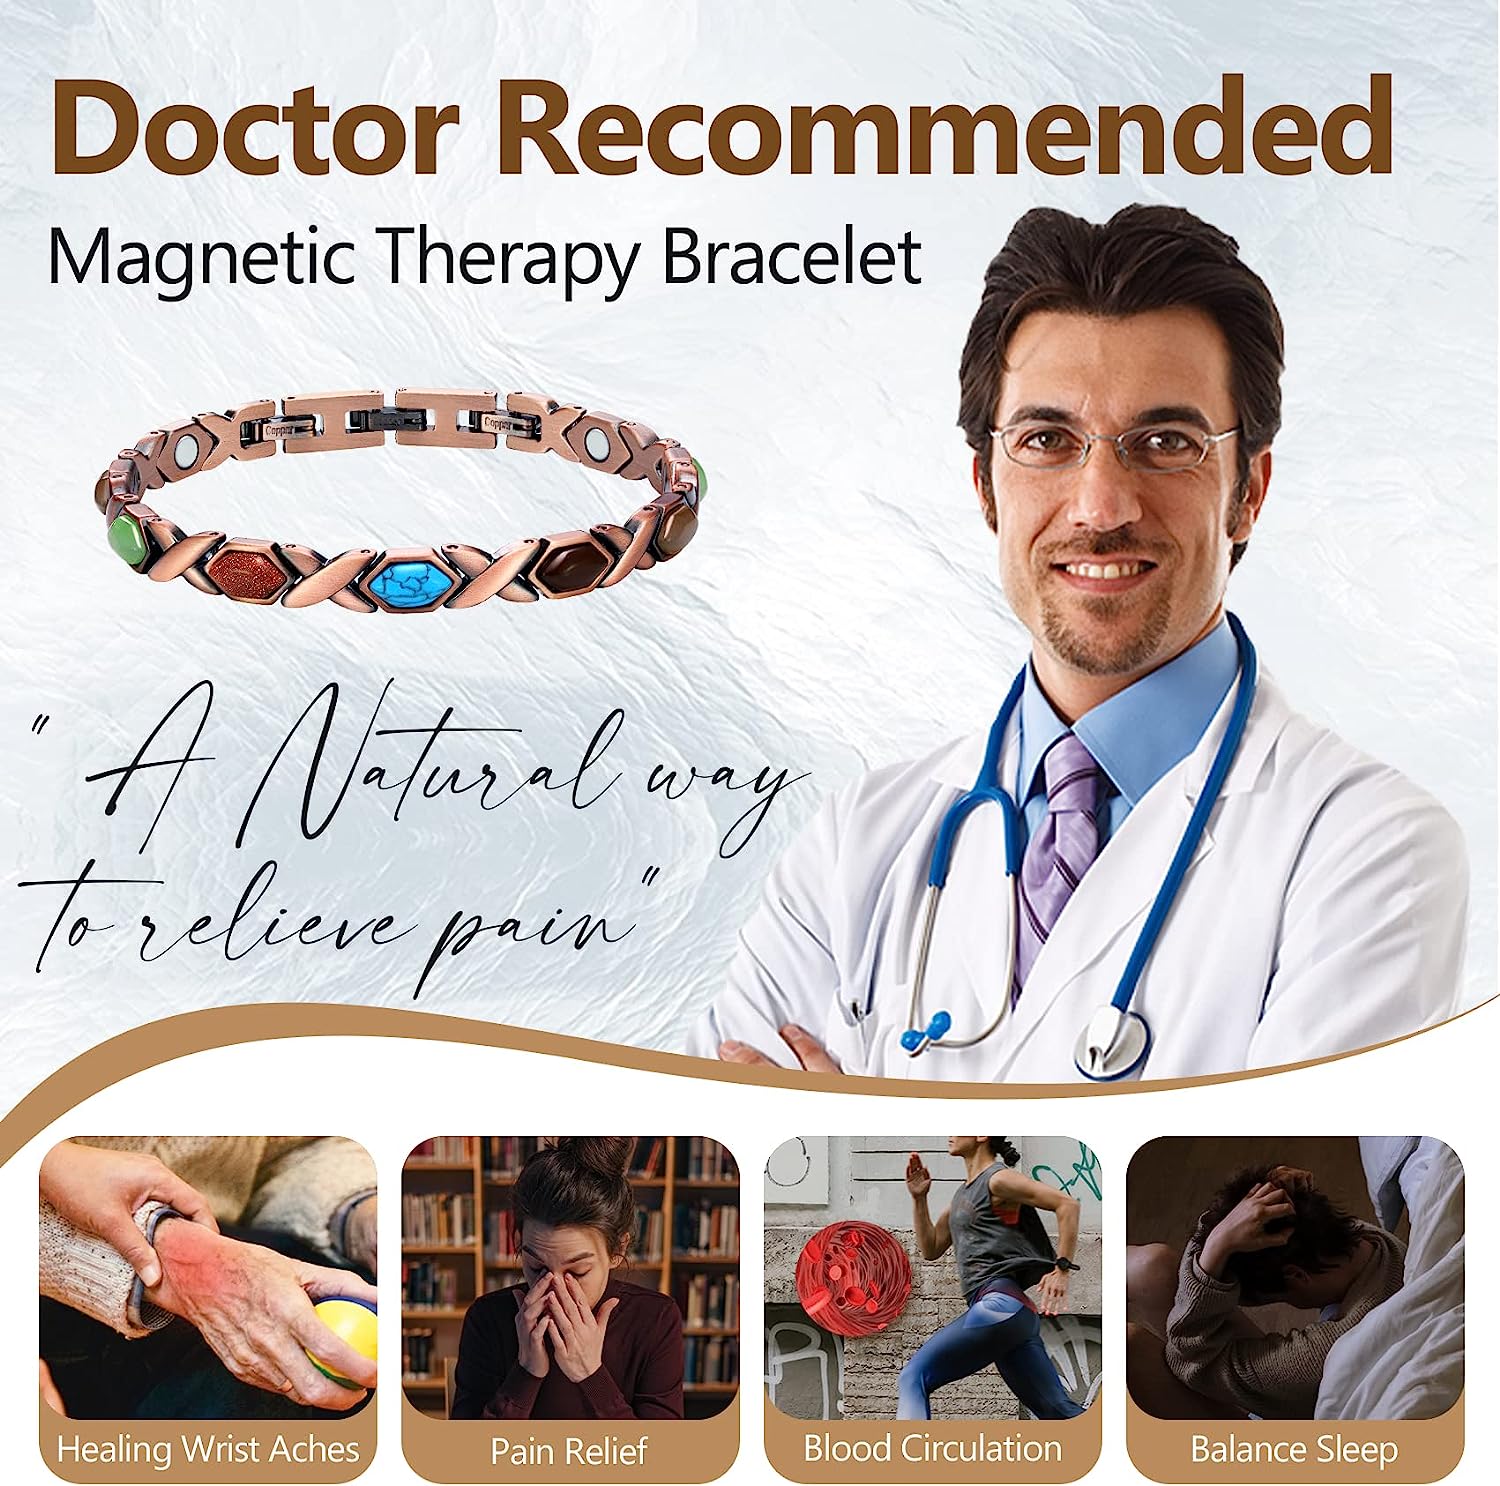 Magnetic Therapy Jewelry and Health Bracelets: Scientific Basis and Controversy